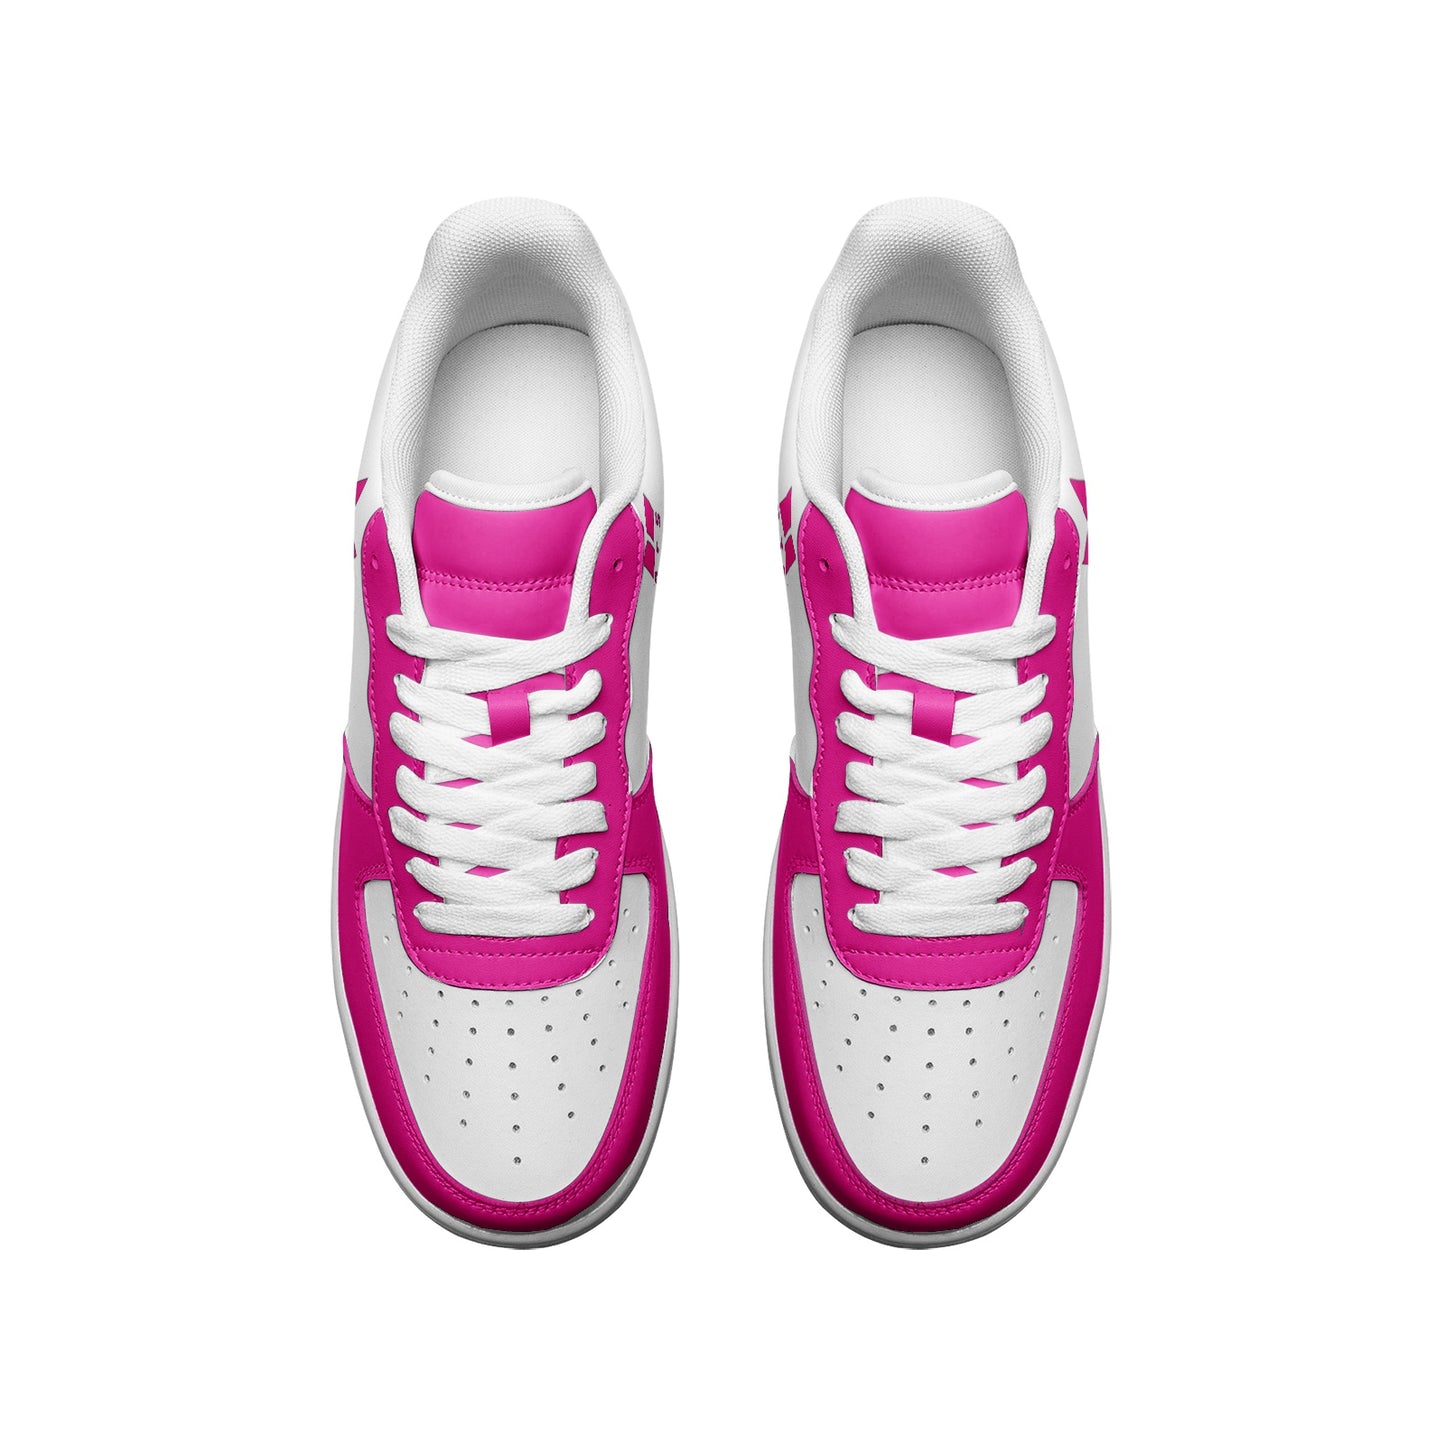 BTS Logo Unisex Low Top Leather Sneakers Hot Pink - SD-style-shop